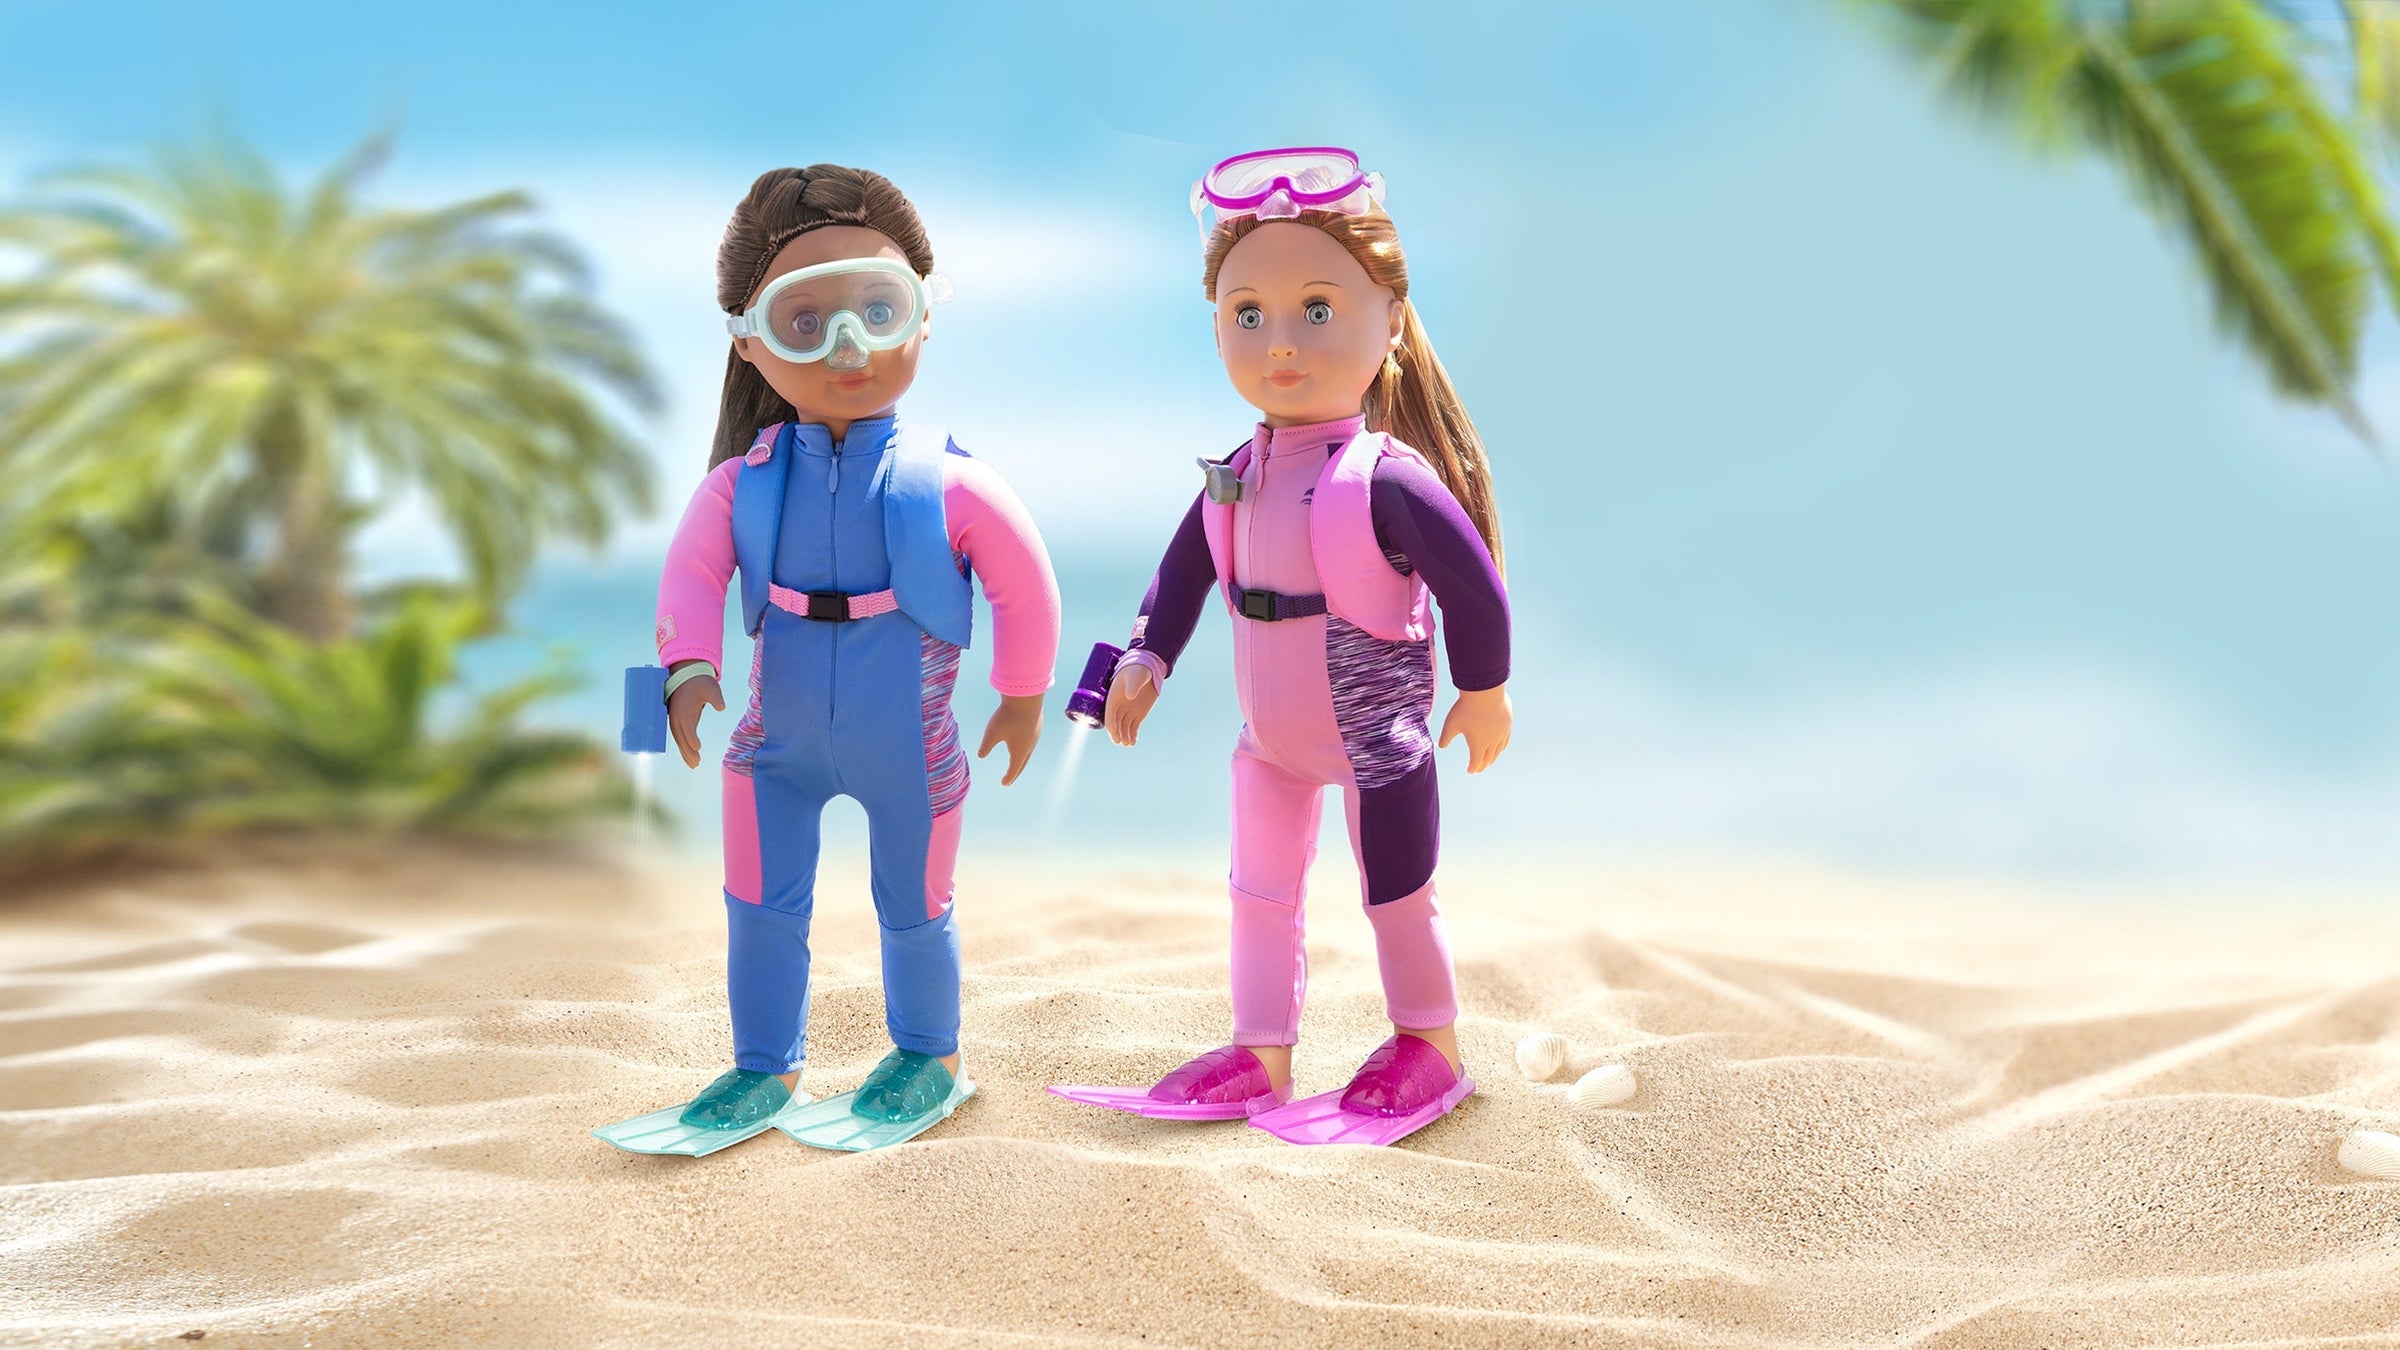 Two dolls wearing wetsuits and swimming equipment